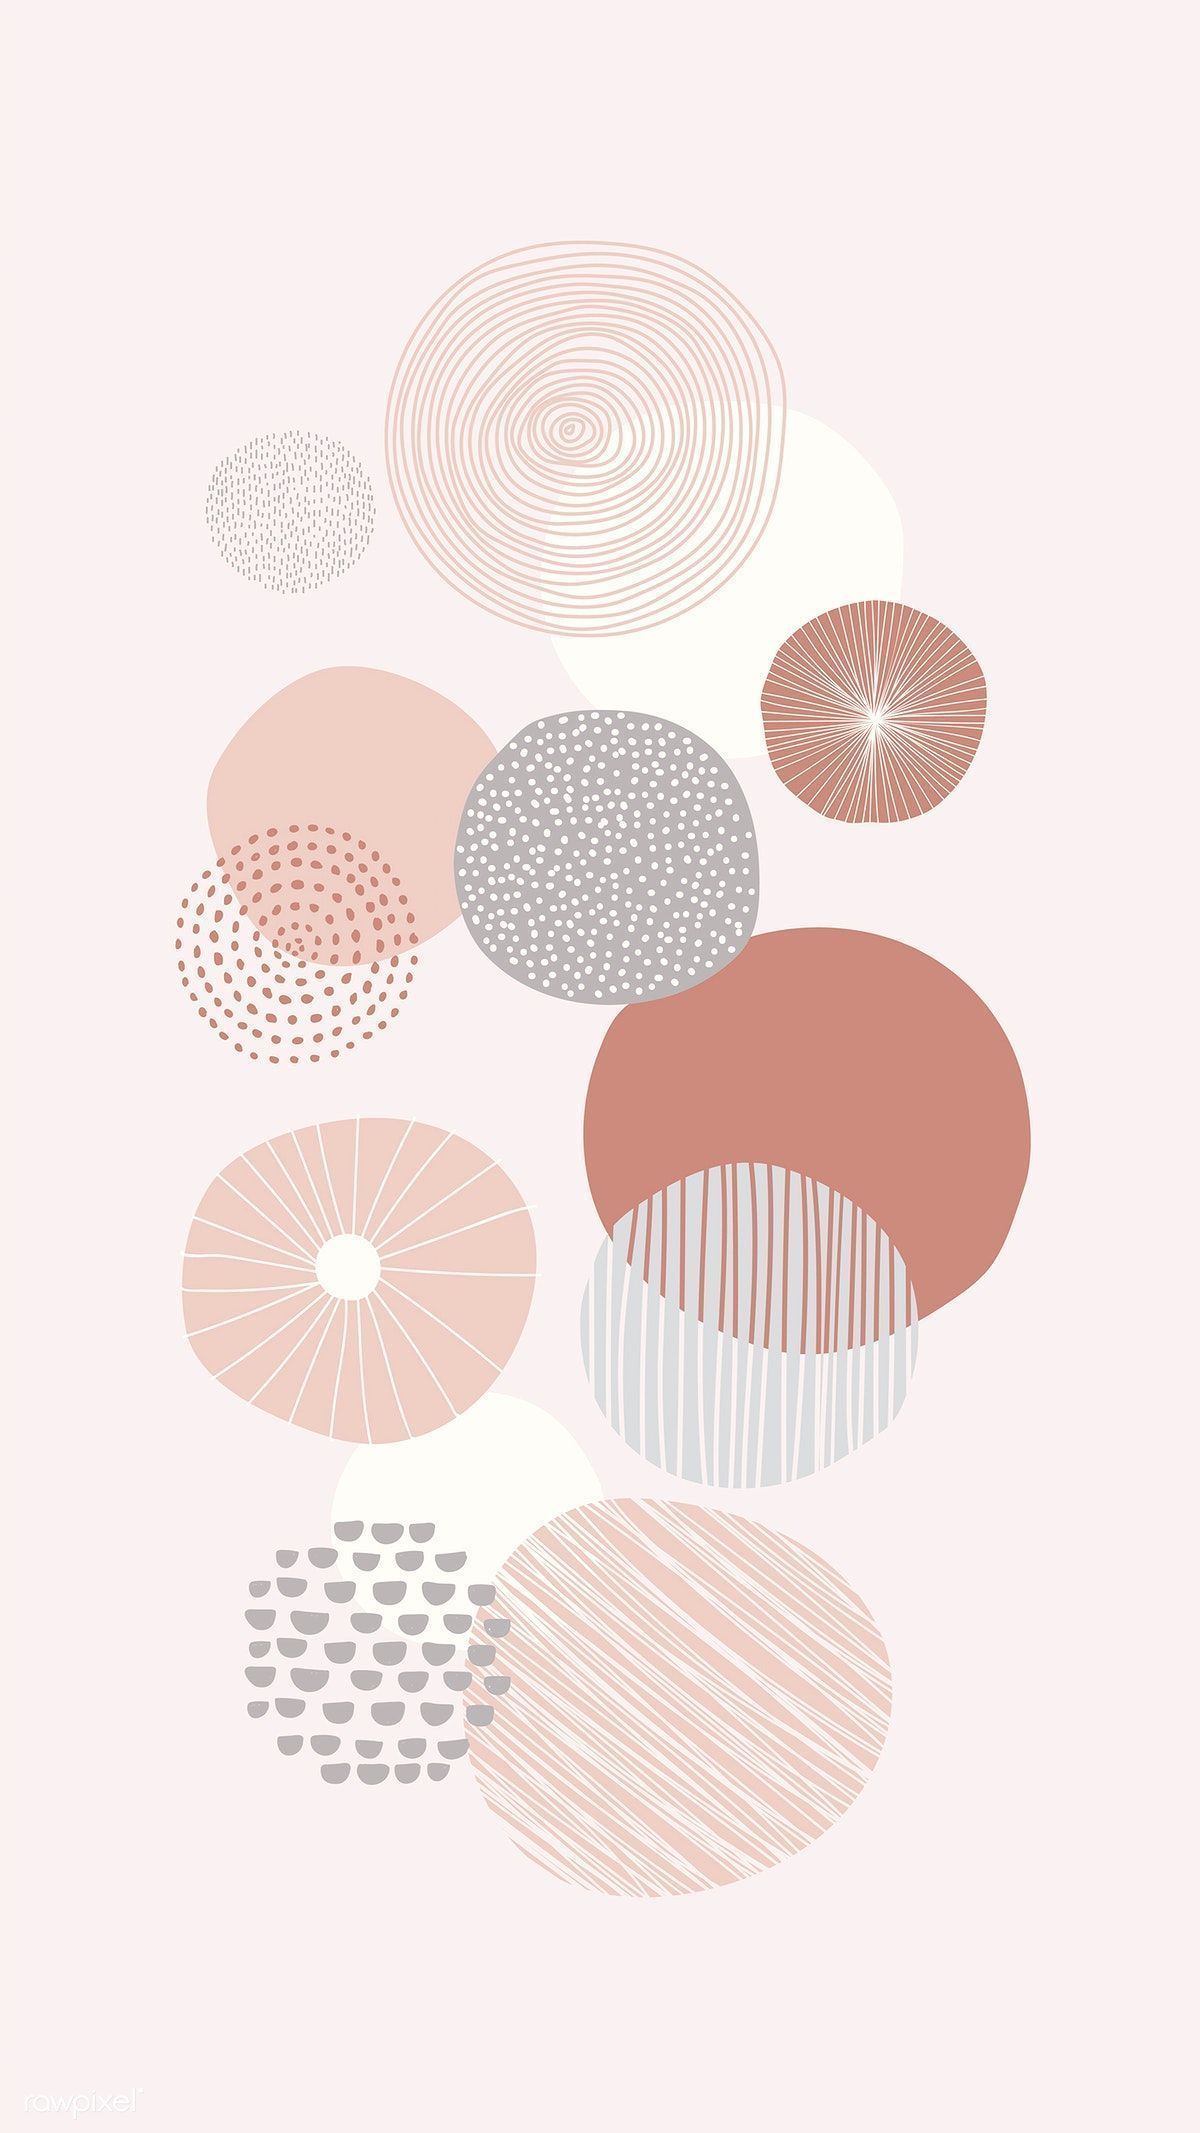 Download premium vector of Abstract circles pattern on a pink background - Doodles, vector, modern